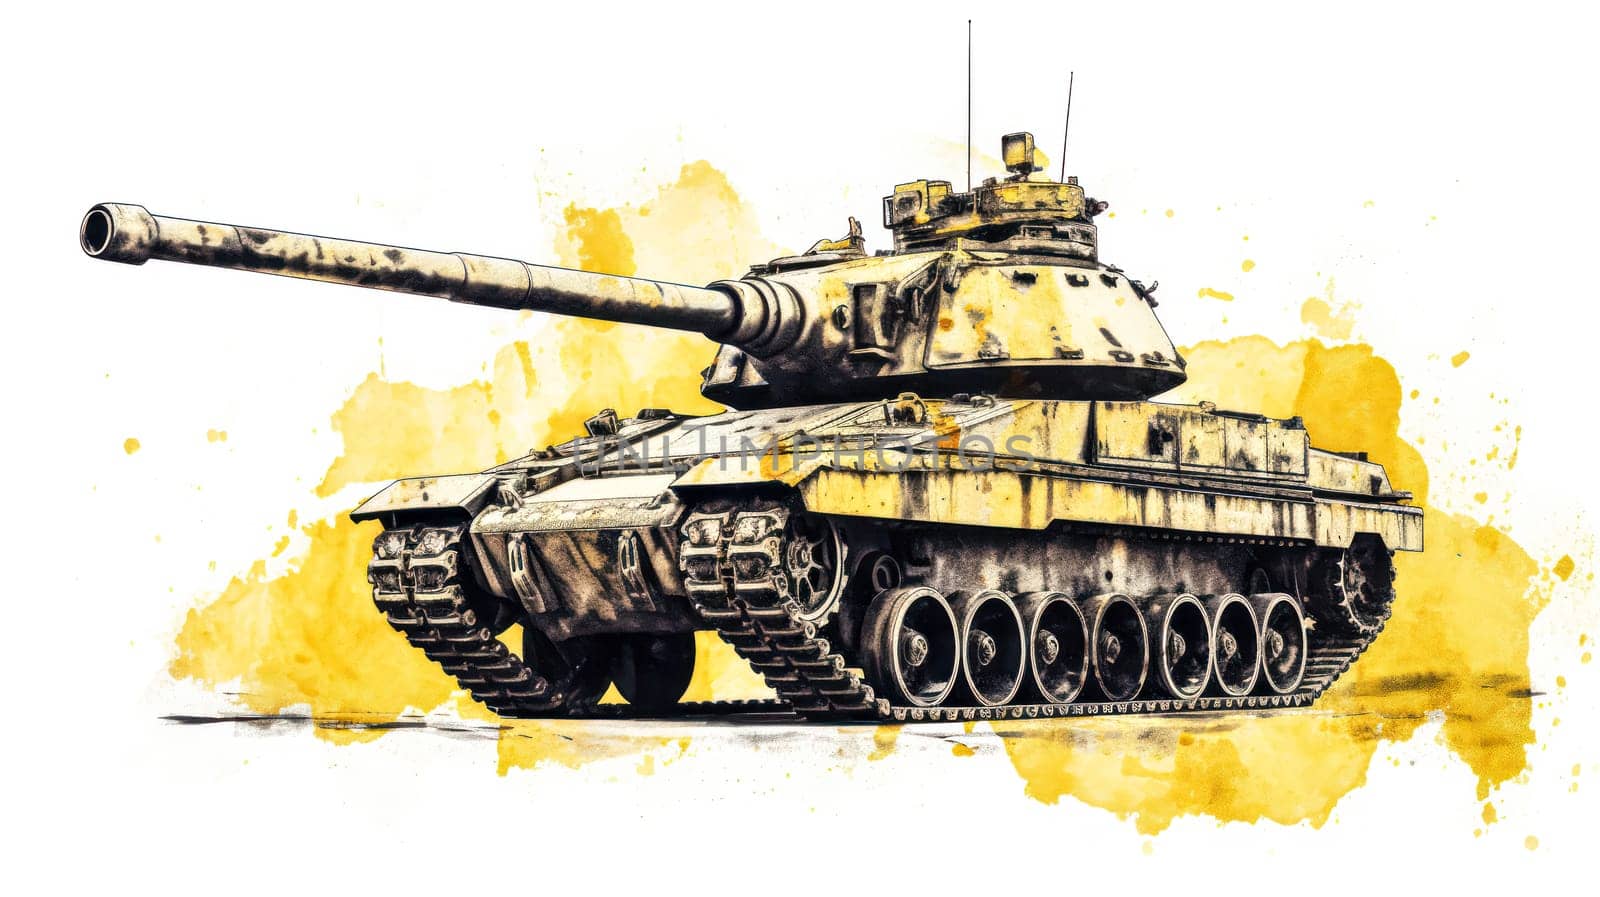 A striking watercolor sketch of a tank with yellow gray lines by Alla_Morozova93